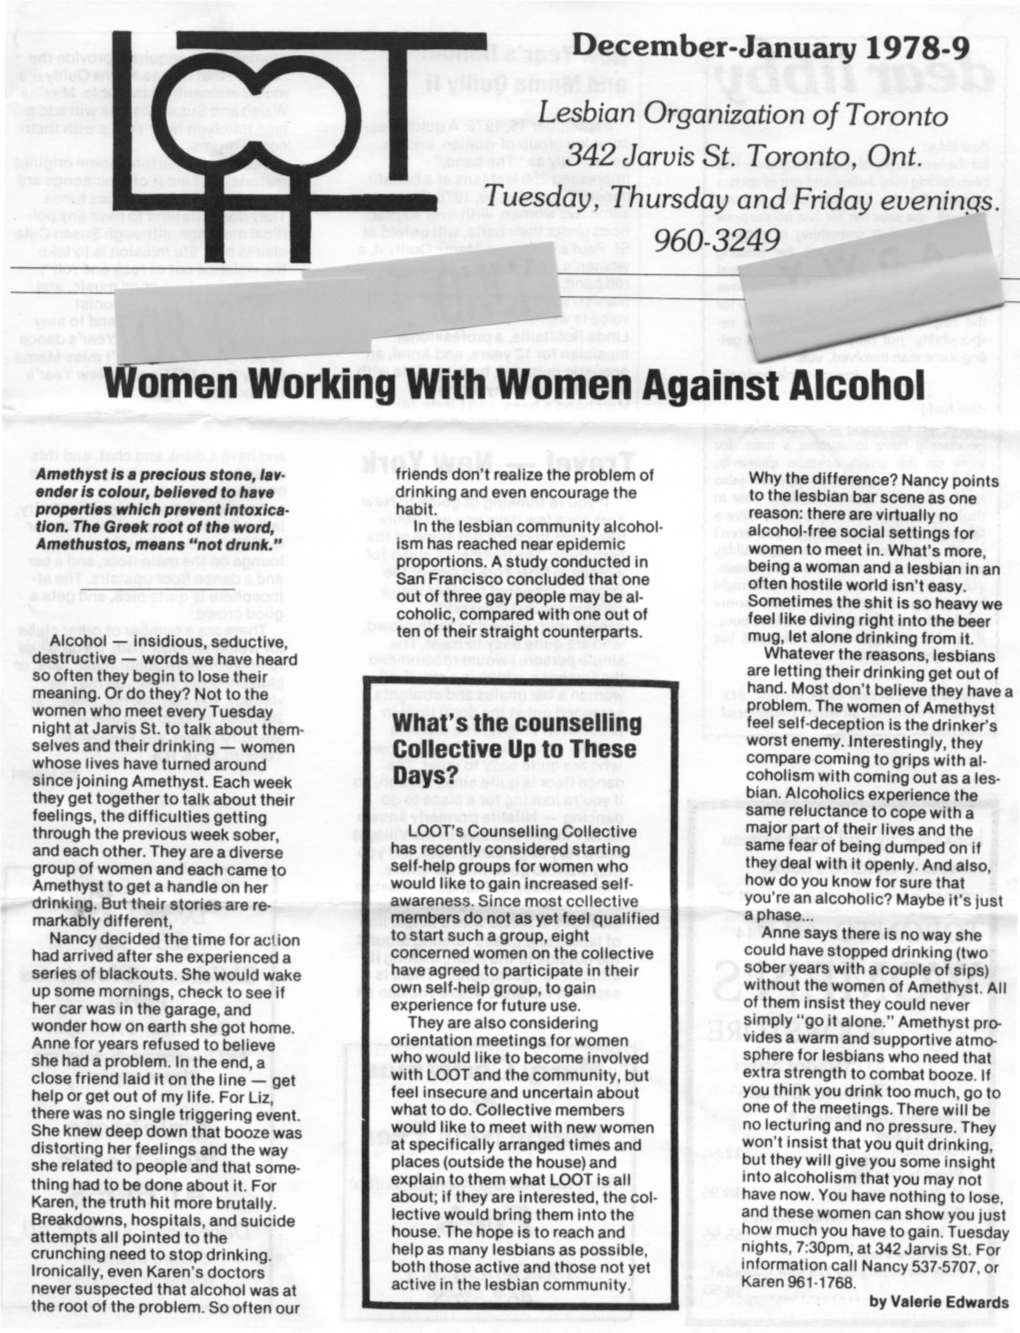 Omen Working with Women Against Alcohol